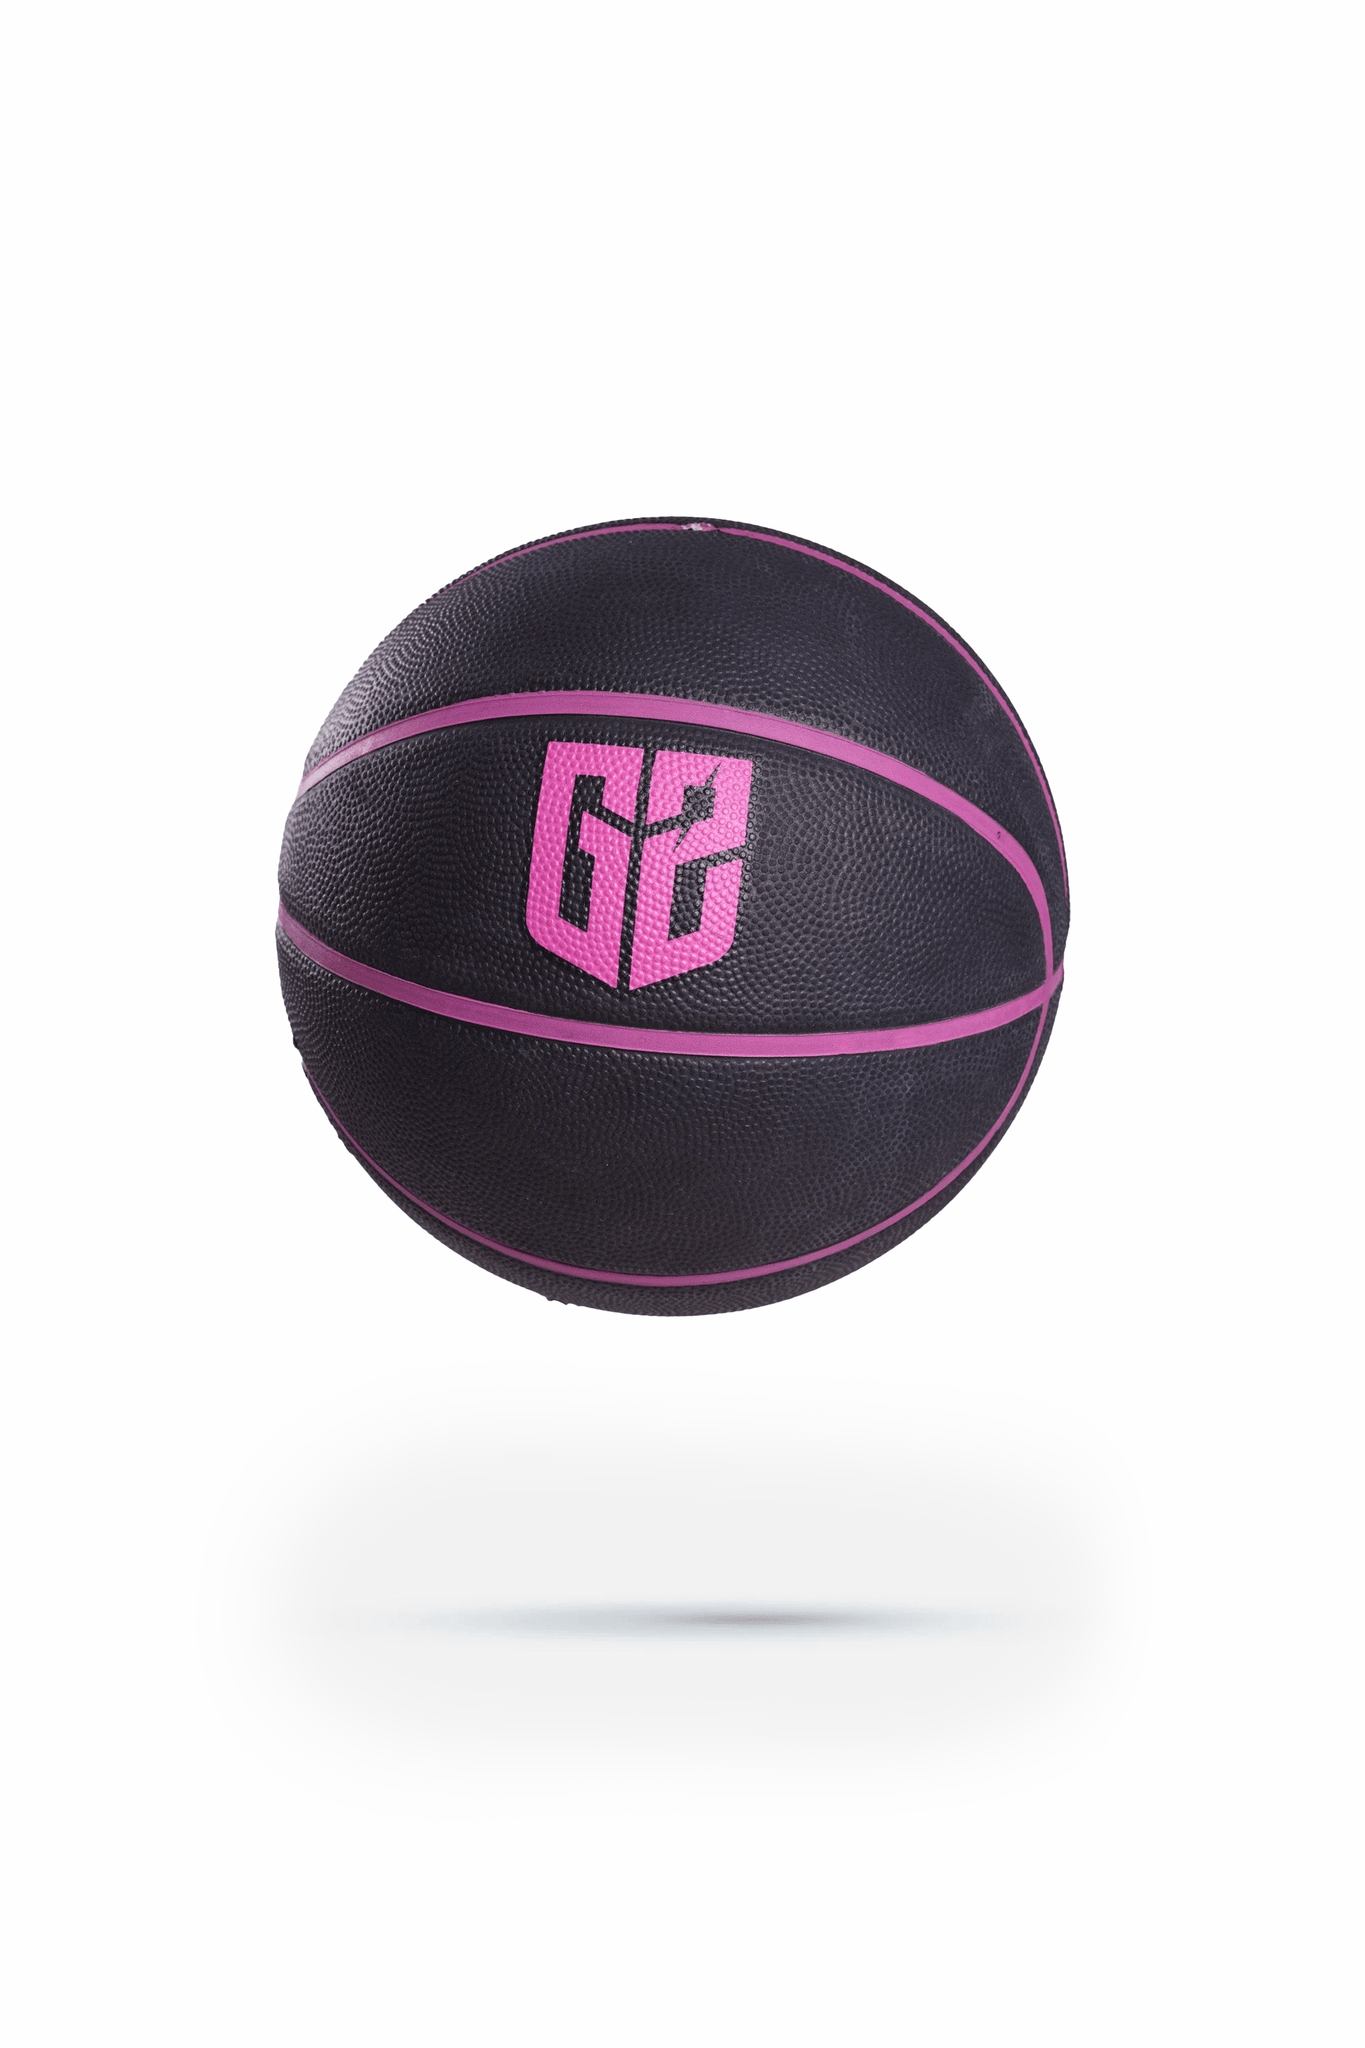 G2 FW22 basketball, channel your team spirit on and off the court. Show your love for G2 Esports with this stylish basketball